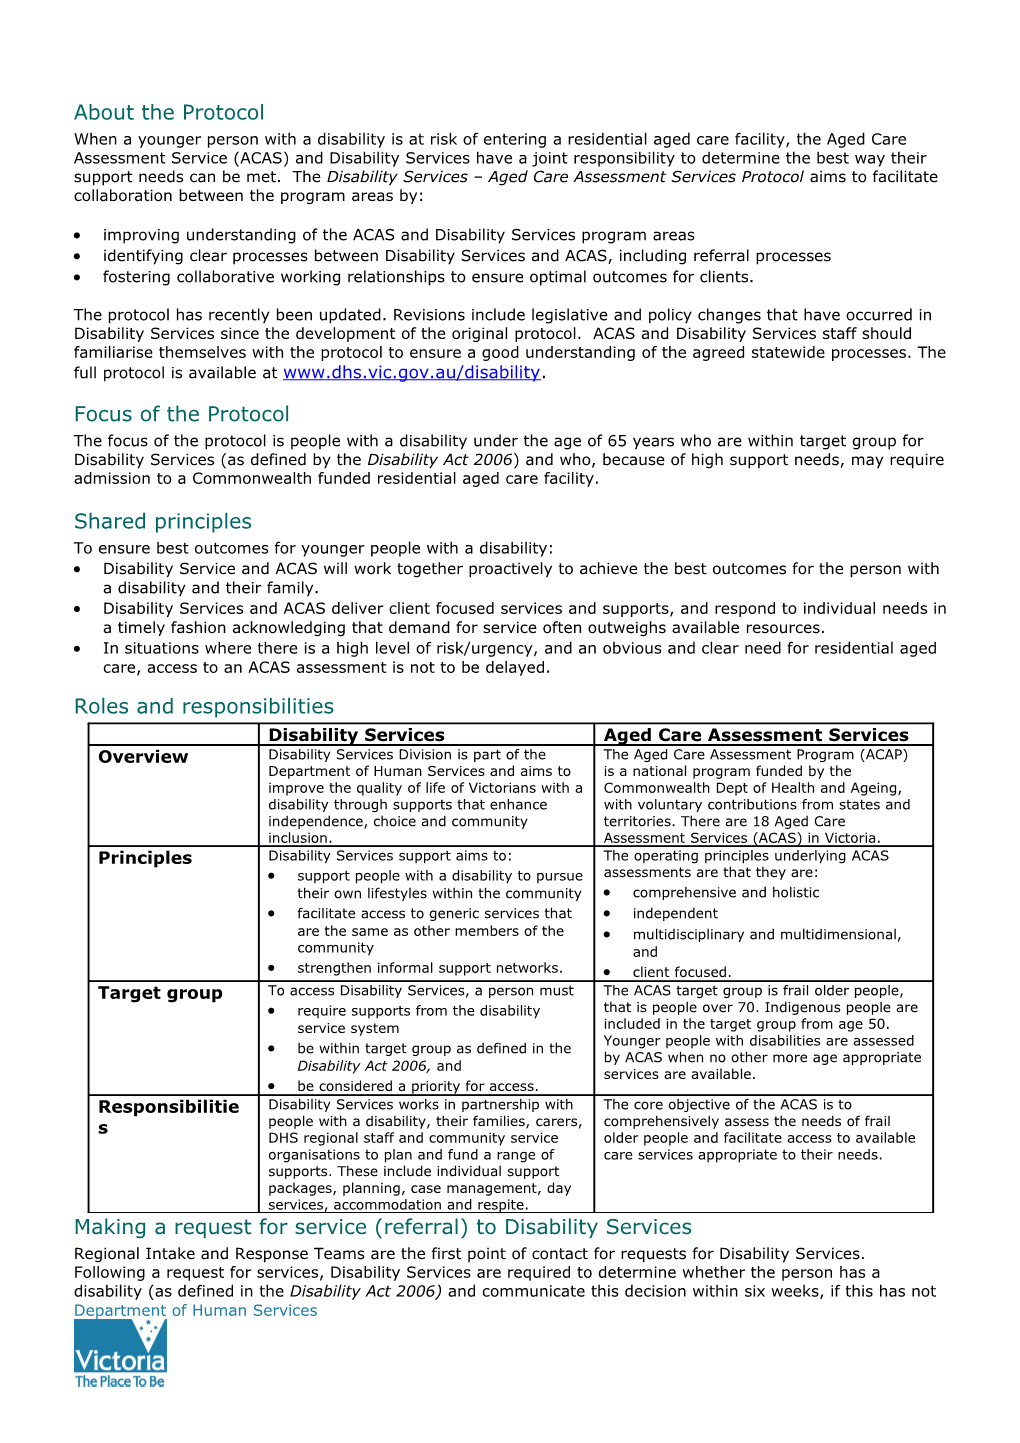 Disability Services Aged Care Assessment Services Protocol: an Overview